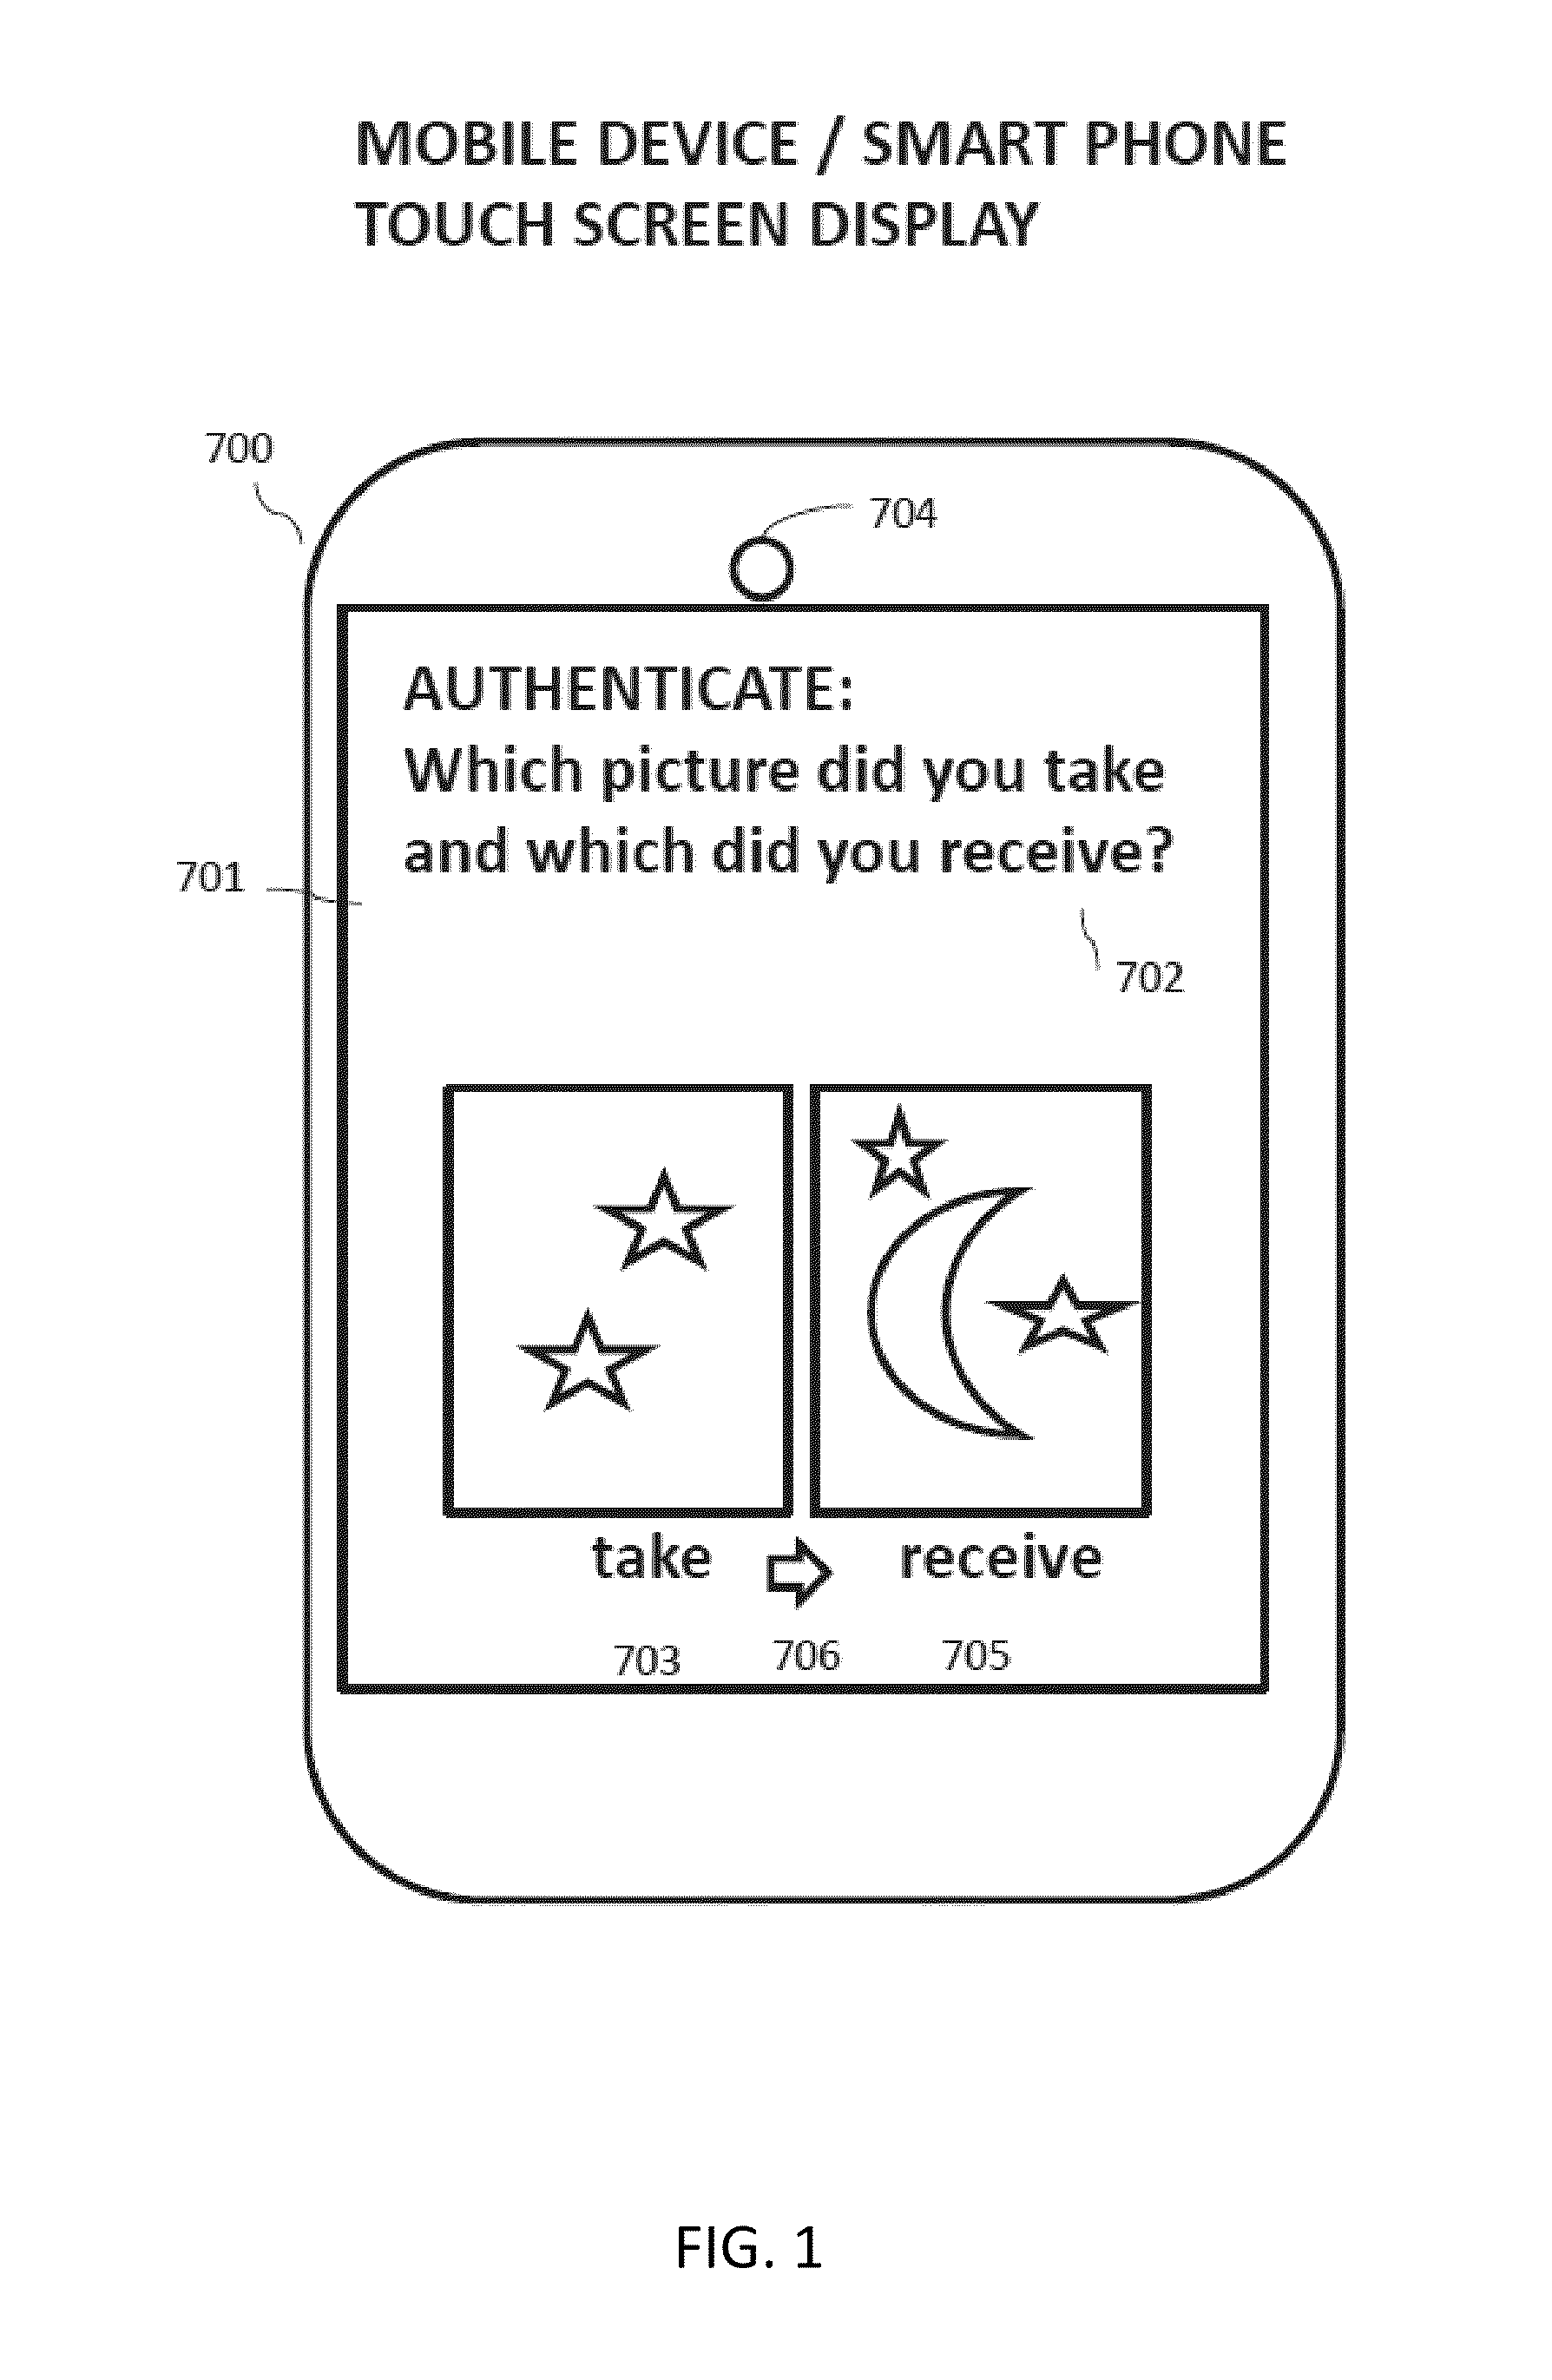 Mobile IO Input and Output for Smartphones, Tablet, and Wireless Devices including Touch Screen, Voice, Pen, and Gestures